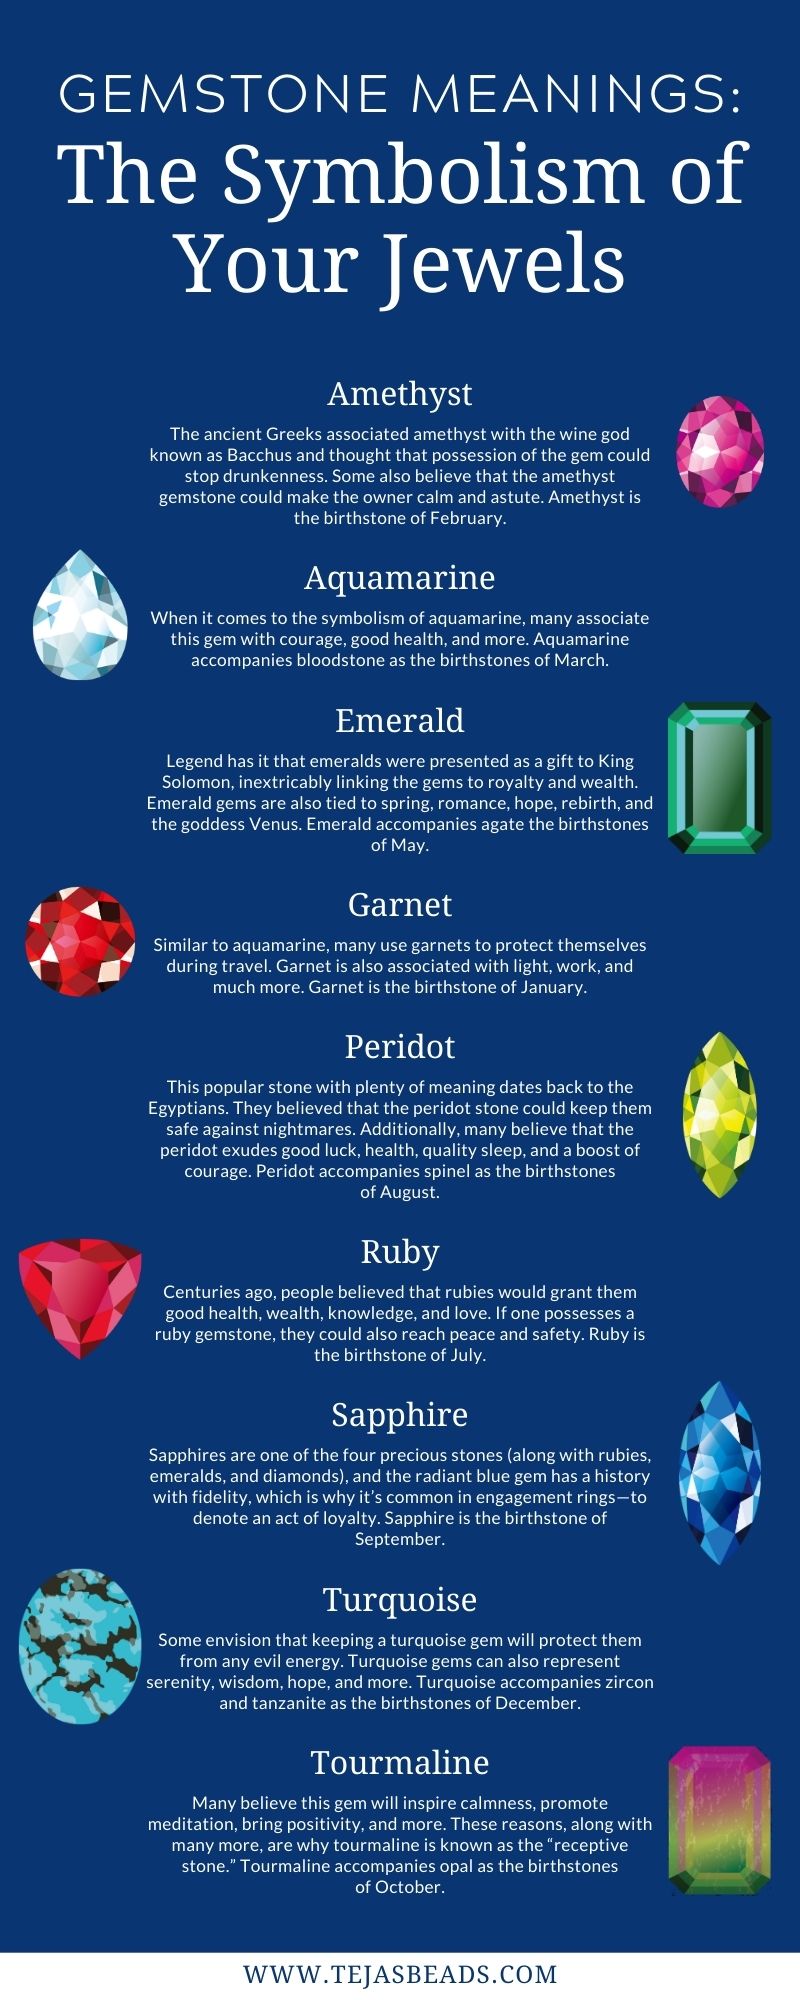 Gemstone Meanings - Uses, Purposes & Directory